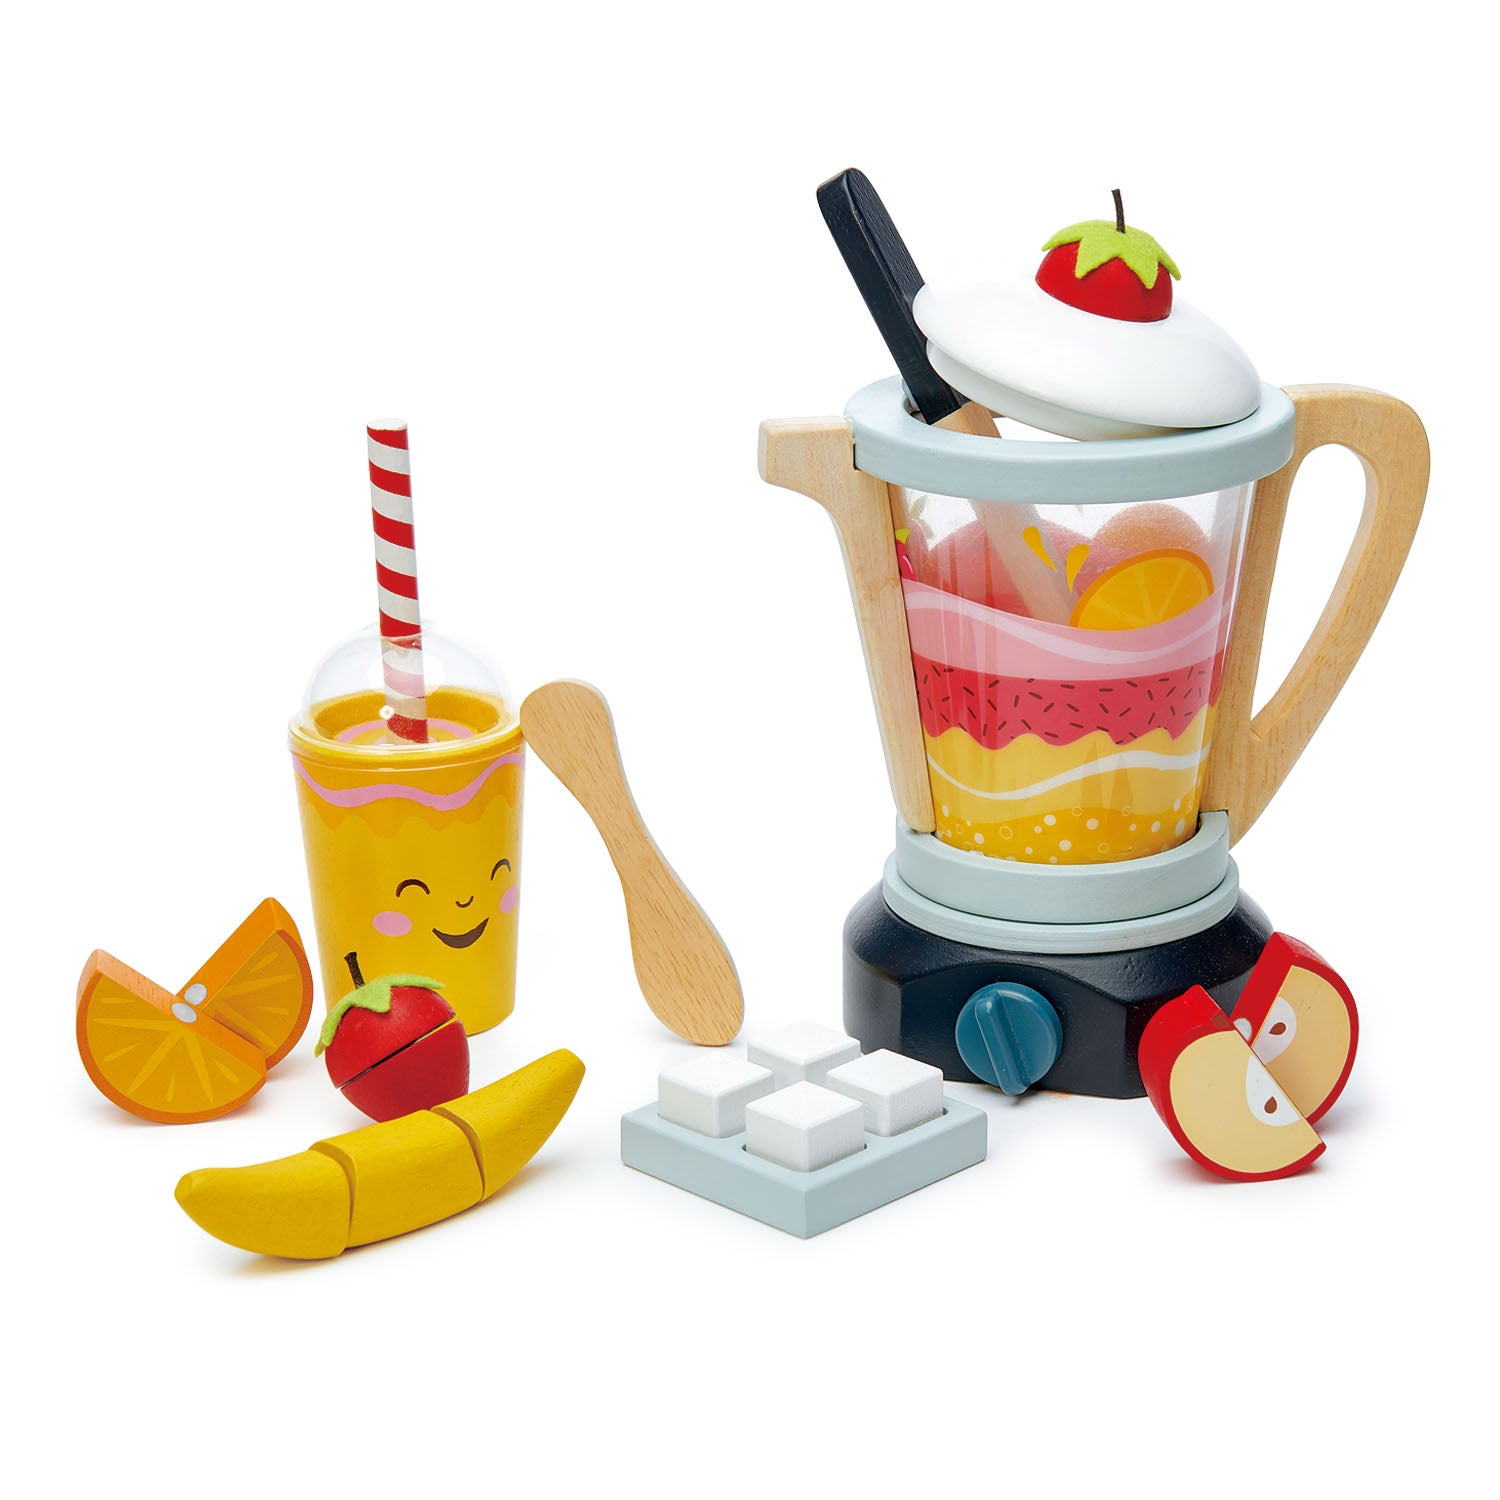 <p>Pretend to be a real smoothie stall with take-away style beaker, stripy straw, and wooden stirrer… Cut the fruit with the wooden knife and pop it all into the stylish blender with pourer and pretty</p>
<p>printed acetate. Blend a strawberry, apple, banana, and orange into a delicious smoothie drink….</p>
<p>Don’t forget the ice cubes!</p>
<p>Age range: 3 Years And Older  </p>
<p>Product size: 8.66 x 9.06 x 8.66”  </p>
<p> Weight: 1.78 lbs</p>
<p><a href="https://www.dropbox.com/s/eiq4bui0bjg9prj/TL8229%20Fruity%20Blender%20Printable.pdf?dl=0" title="Fruity Blender Printable"><img src="https://cdn.shopify.com/s/files/1/1083/1780/files/TL8229-Fruity-Blender-Printable-dl_480x480.jpg?v=1597916438" alt="Fruity Blender Printable"></a></p>
